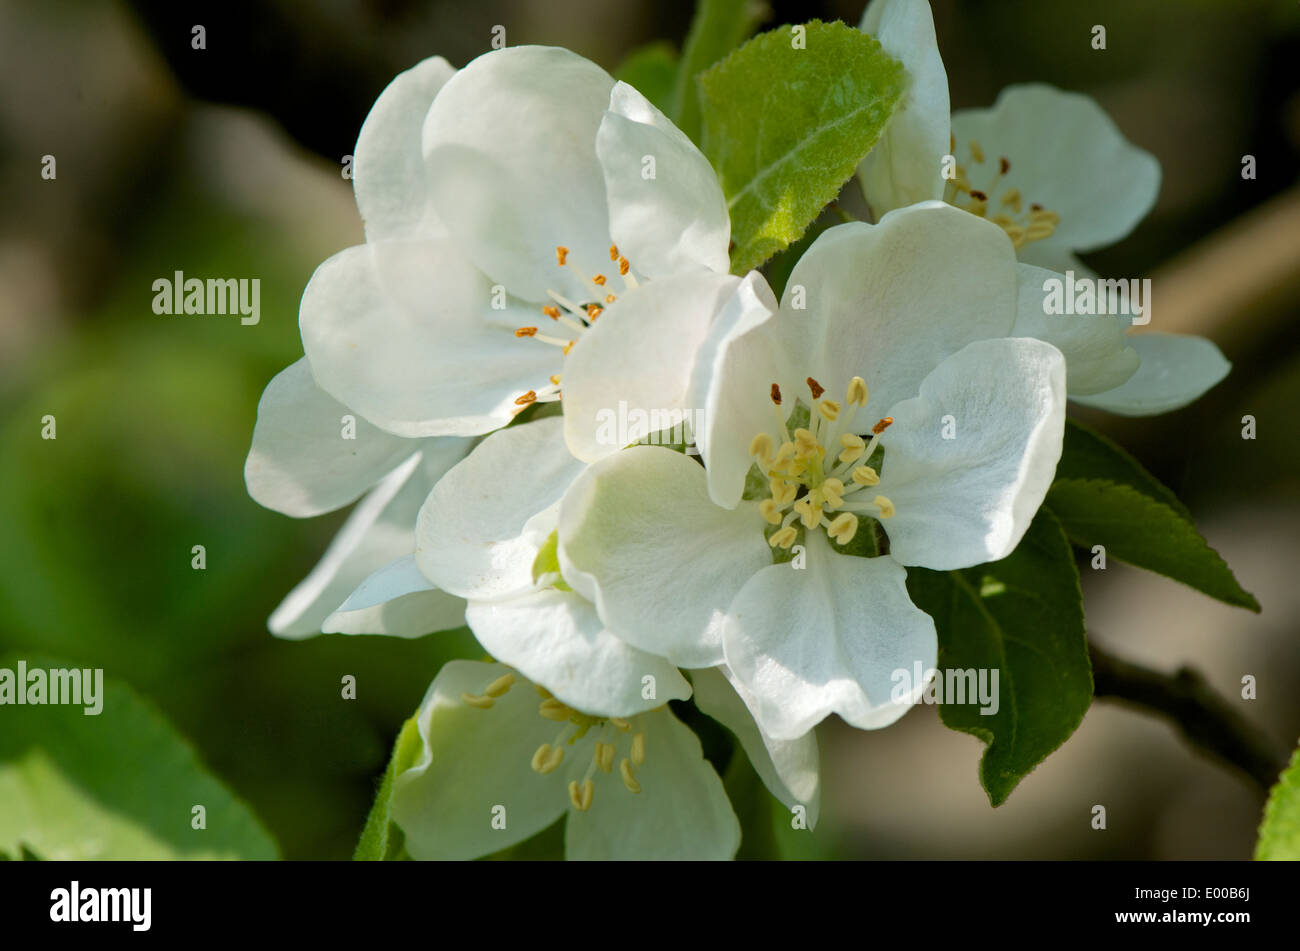 Detailed close up of white apple blossom flower Stock Photo